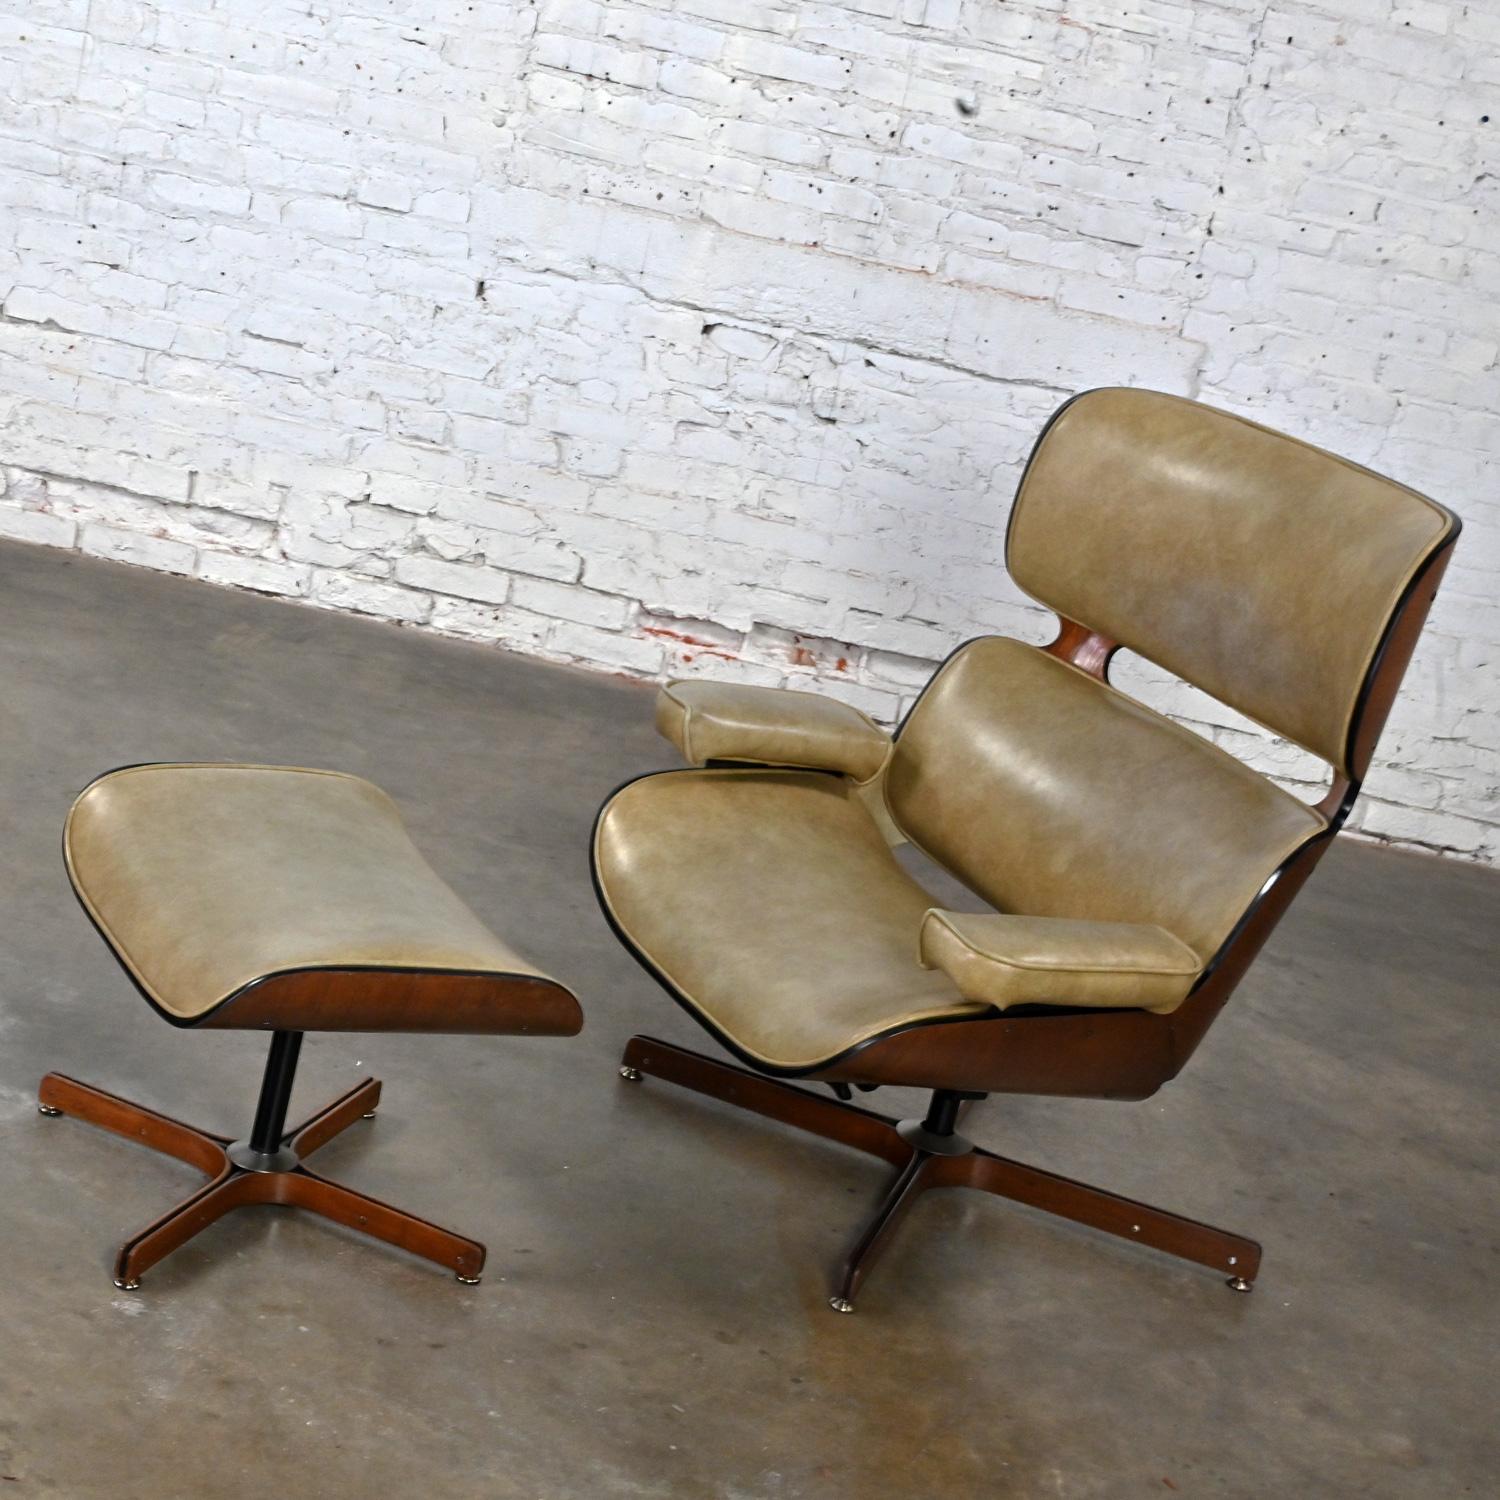 American Mid 20th MCM Mr. Chair Lounge Chair & Ottoman by George Mulhauser for Plycraft For Sale